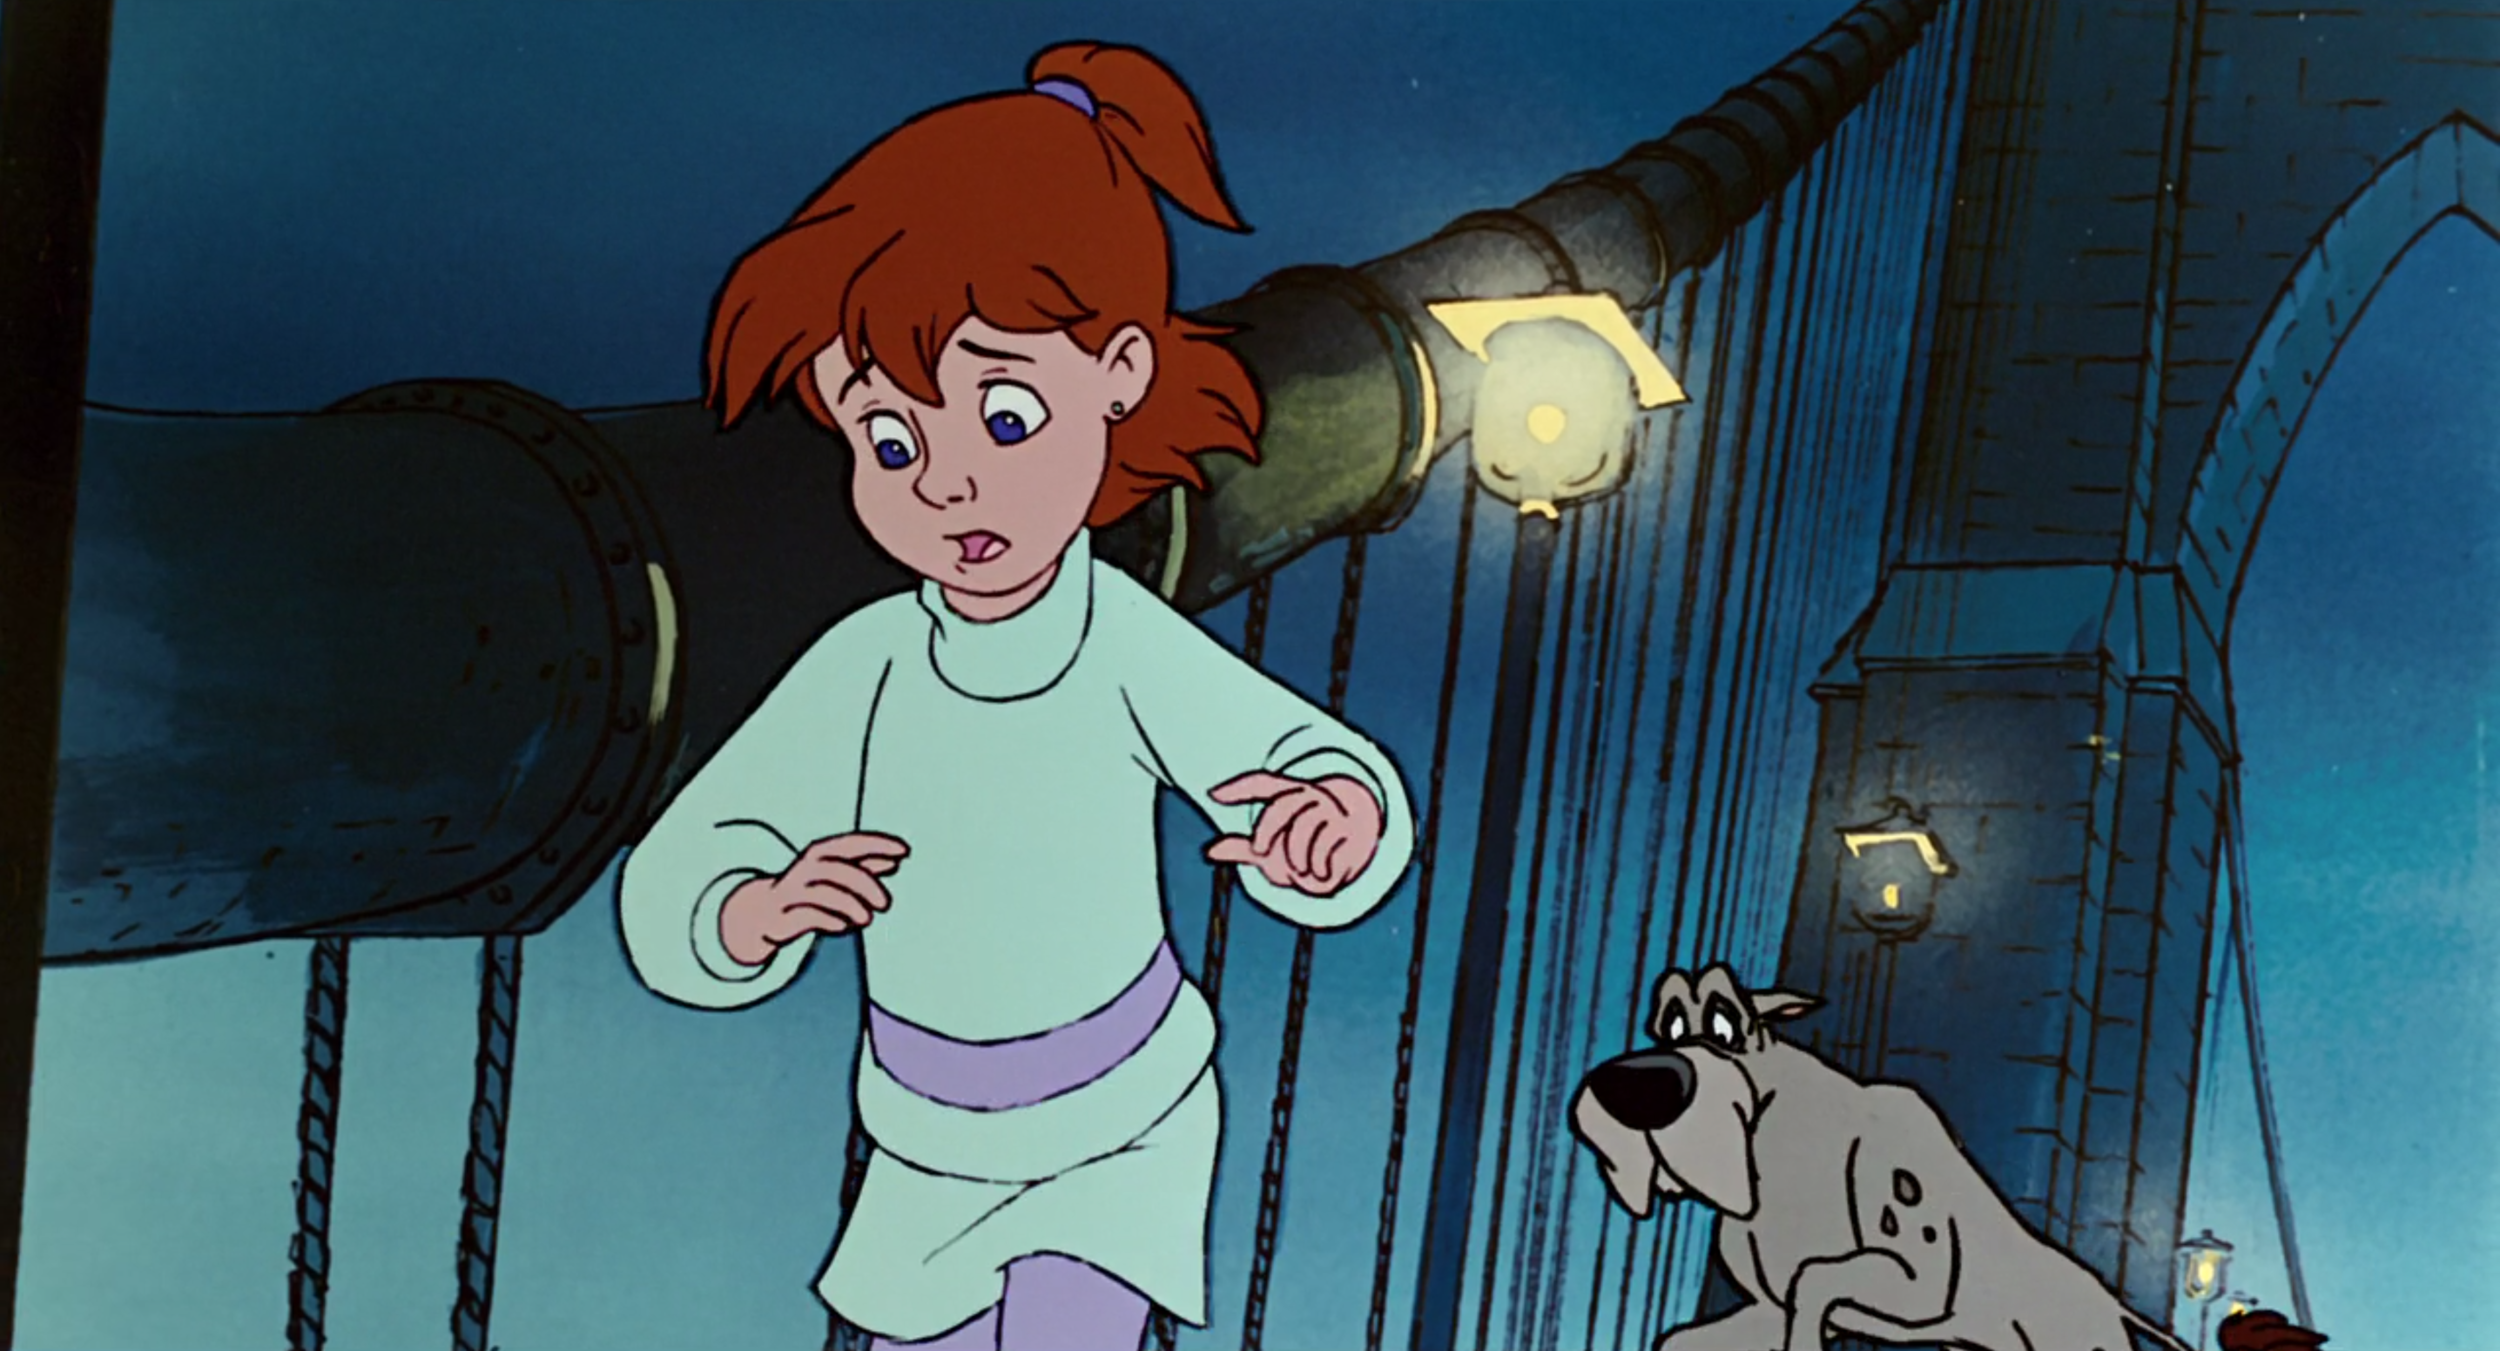   Oliver and Company (1988) , Walt Disney Feature Animation.  